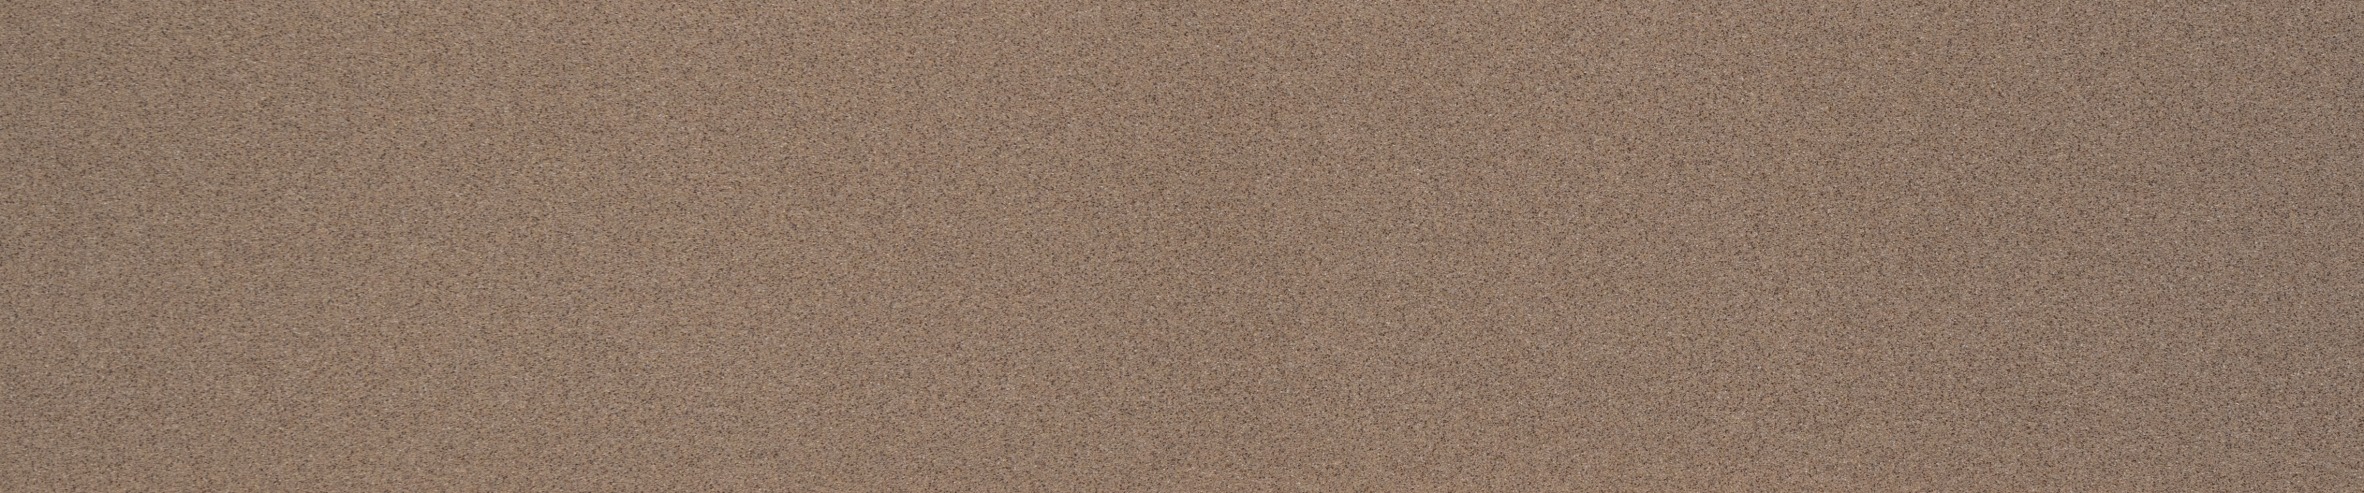 Amber by Hanex Solid Surfaces full sheet